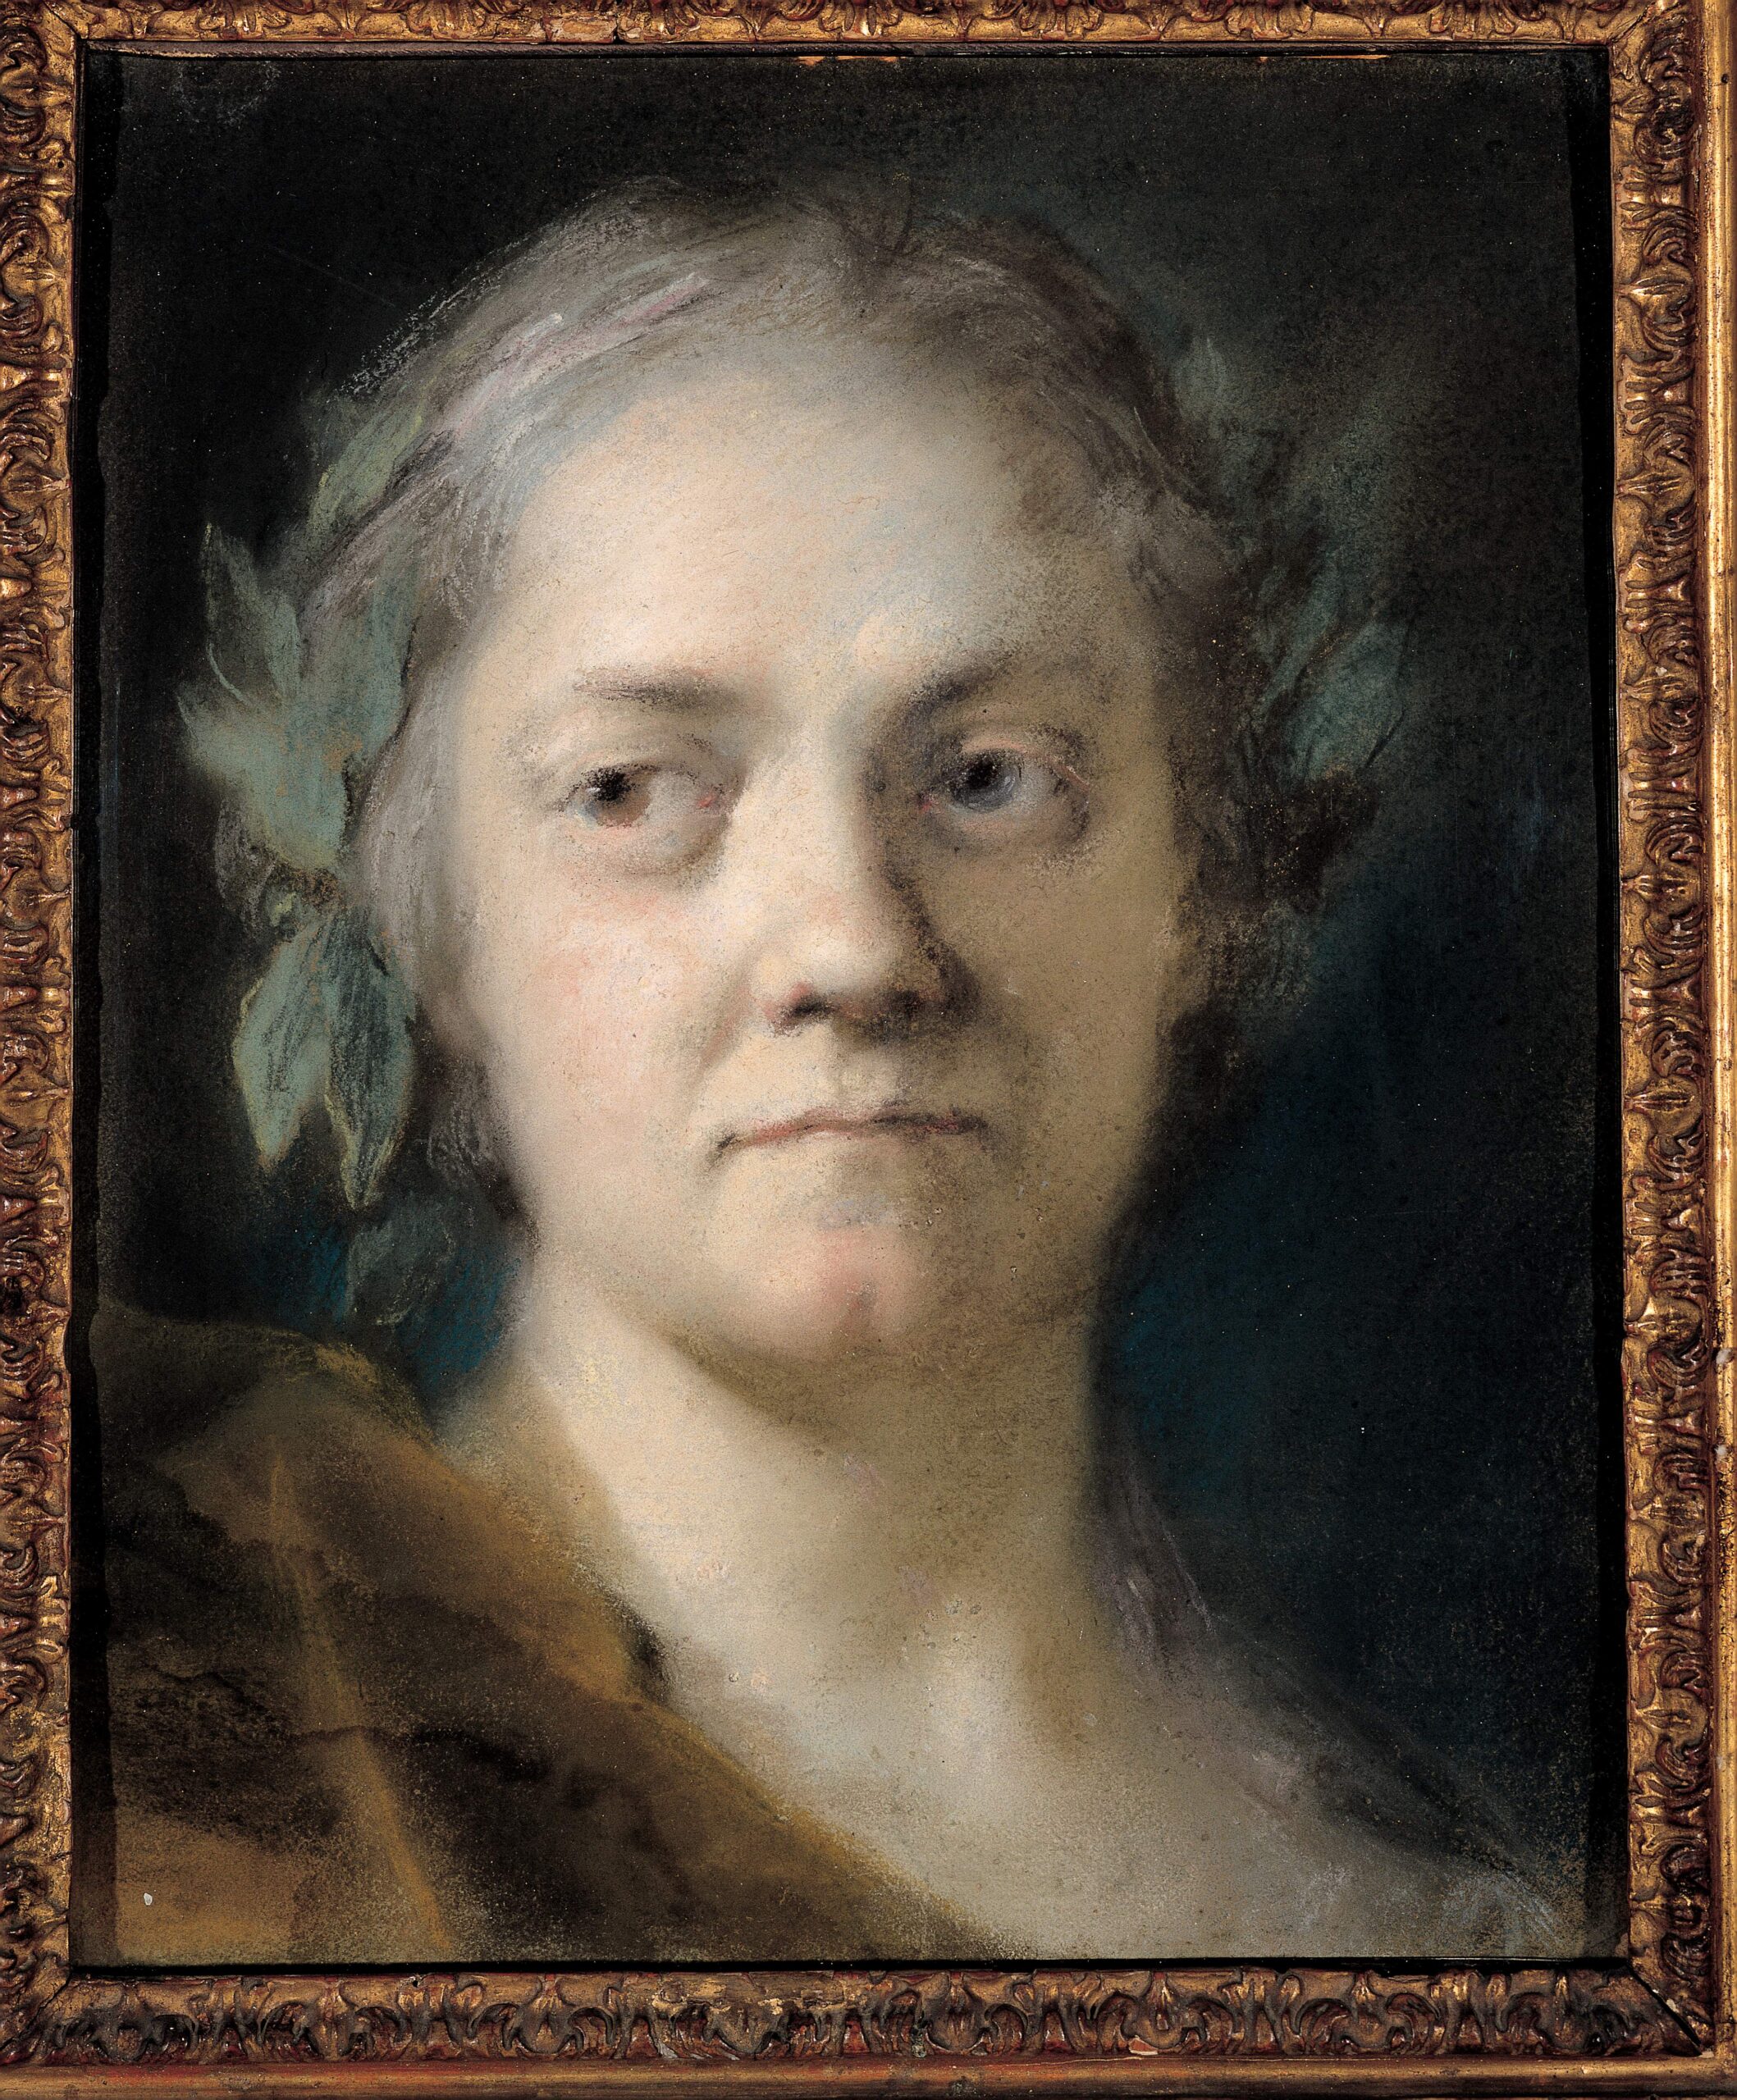 Rosalba Carriera, Autoportret, ok. 1747. Gallerie dell‘Accademia, Florencja fot. Photoservice Electa / BE&W